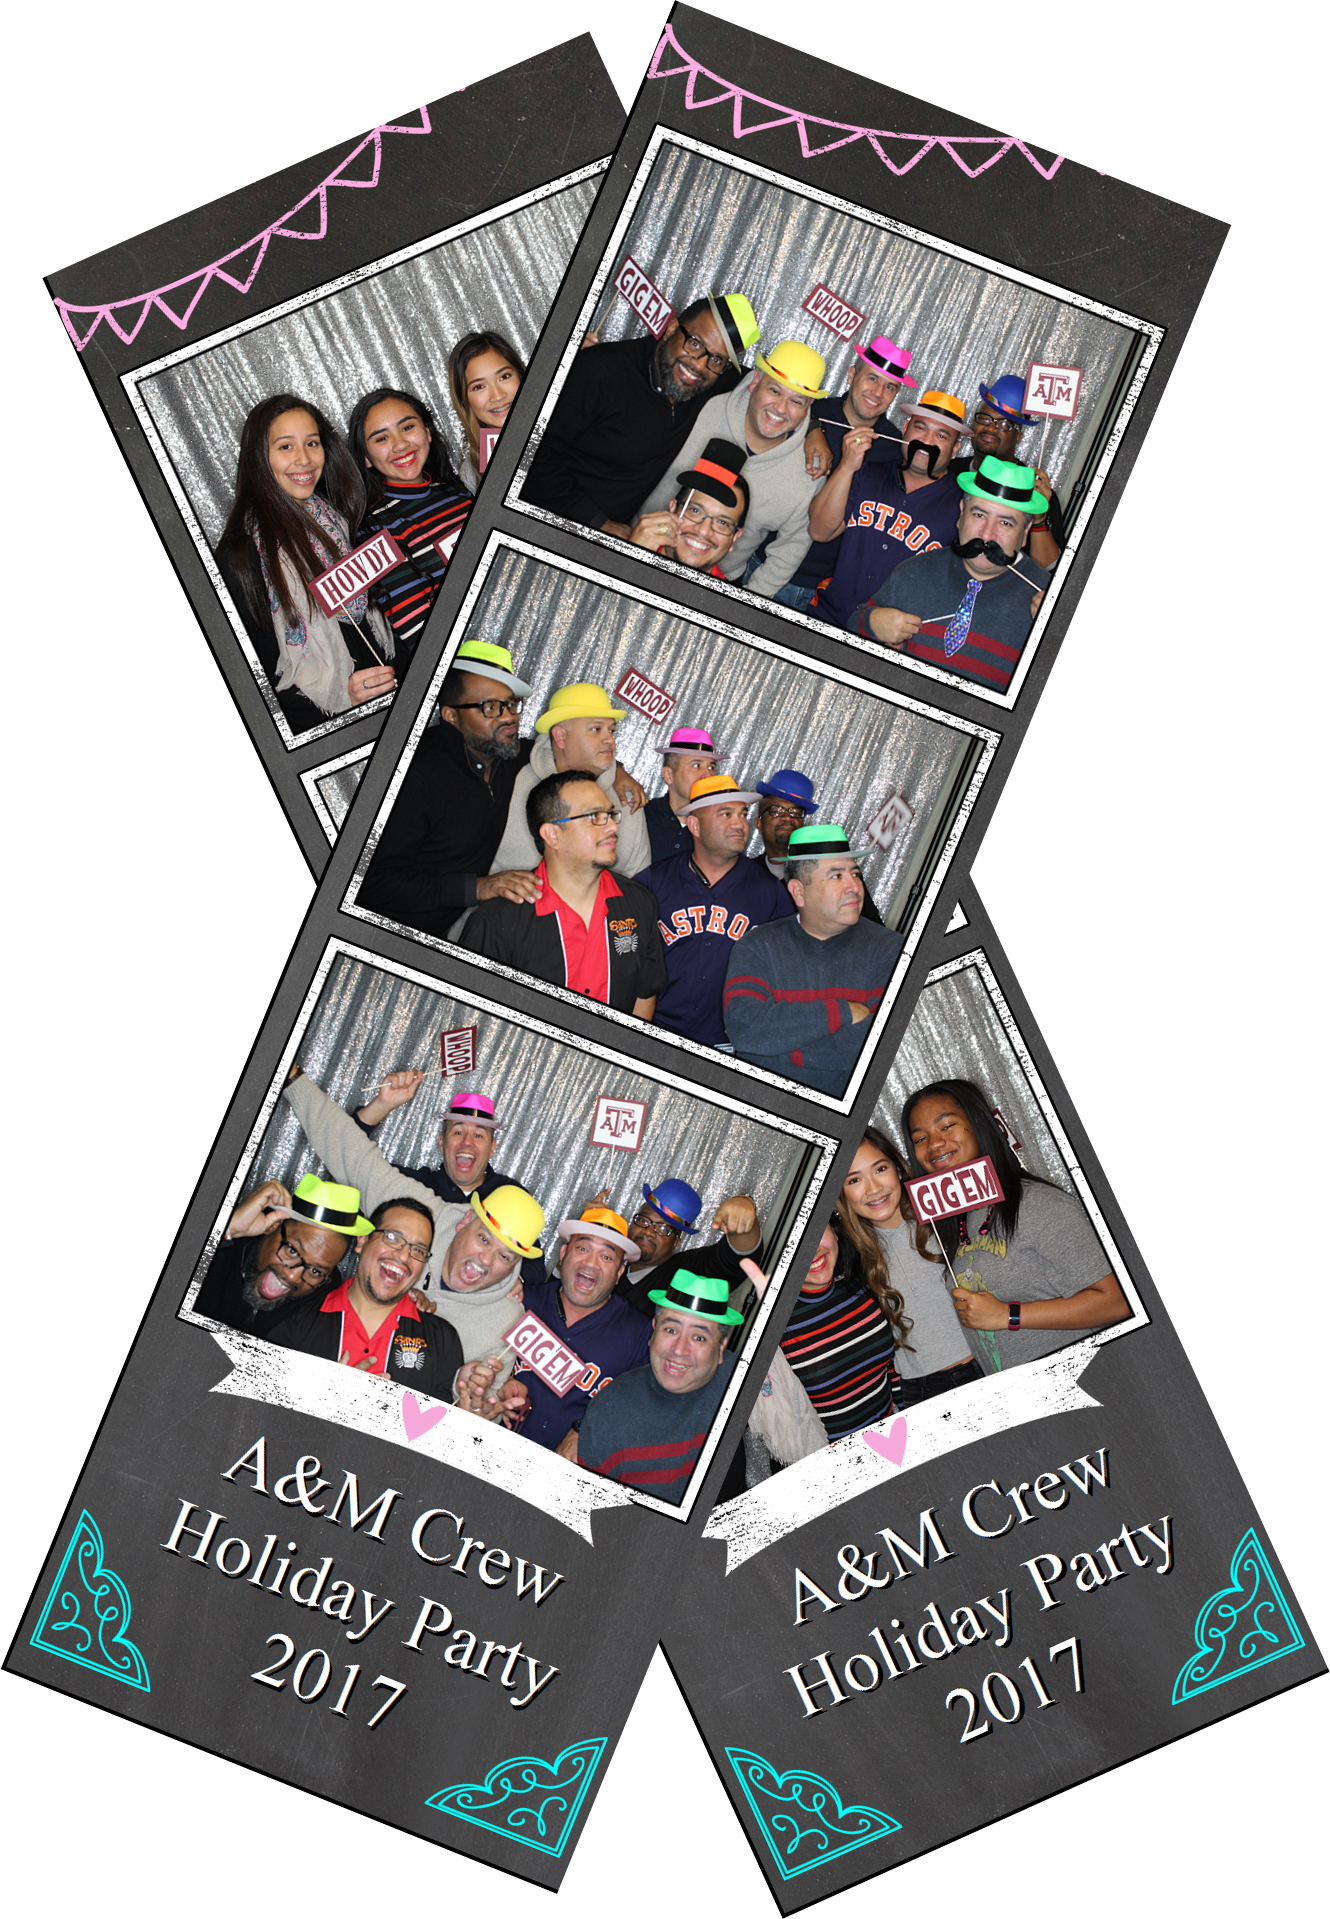 A& M Crew Holiday Party2017 Photobooth PNG